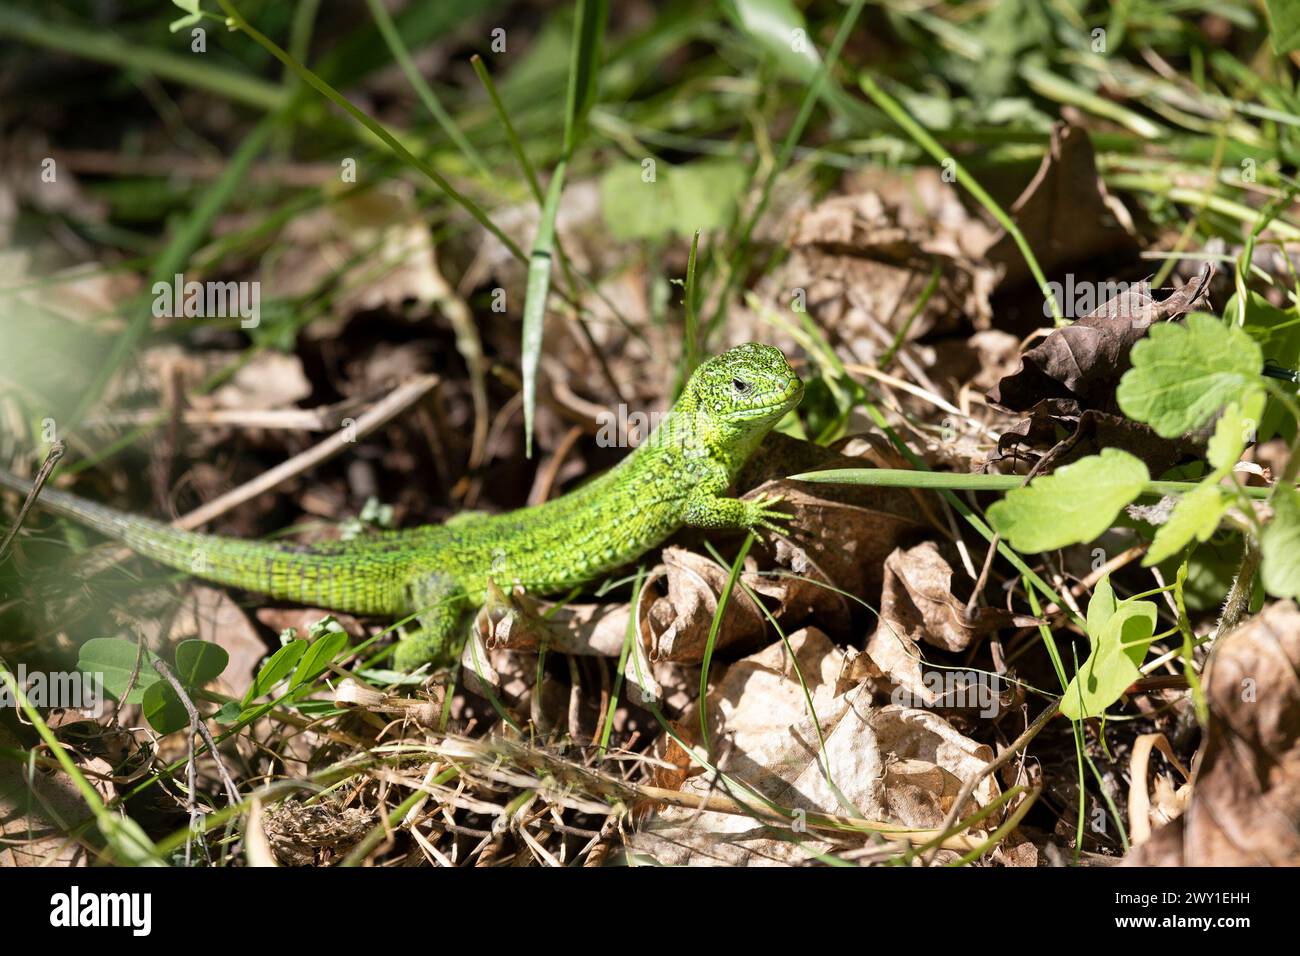 small green lizard in the grass Stock Photo